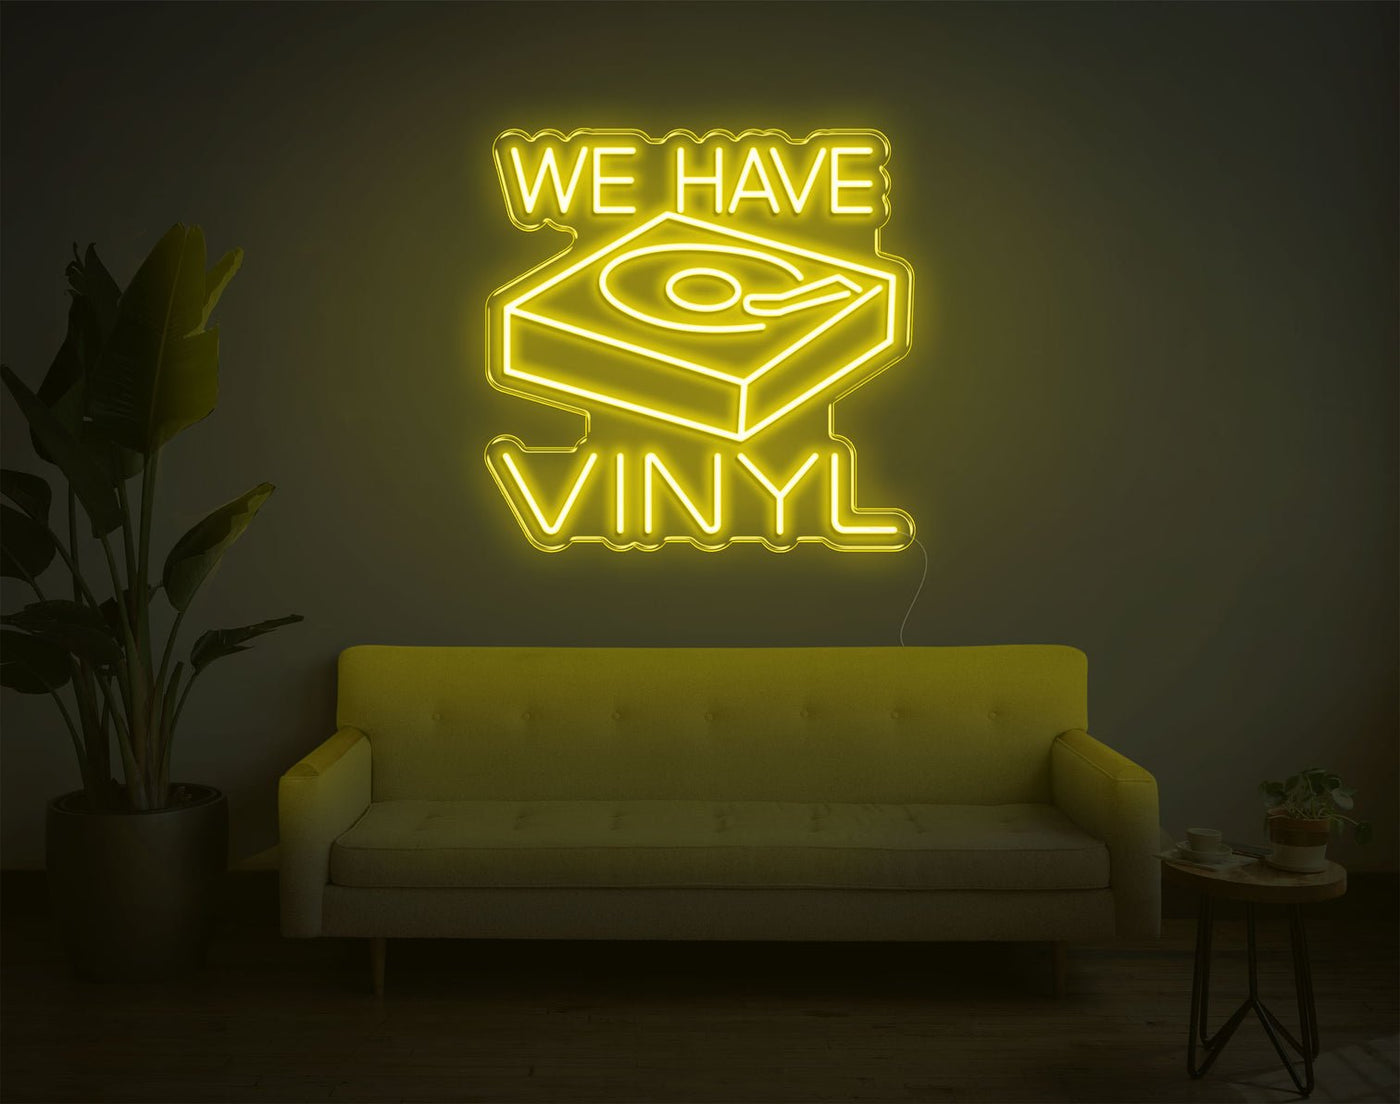 We Have Vinyl LED Neon Sign - 20inch x 20inchHot Pink